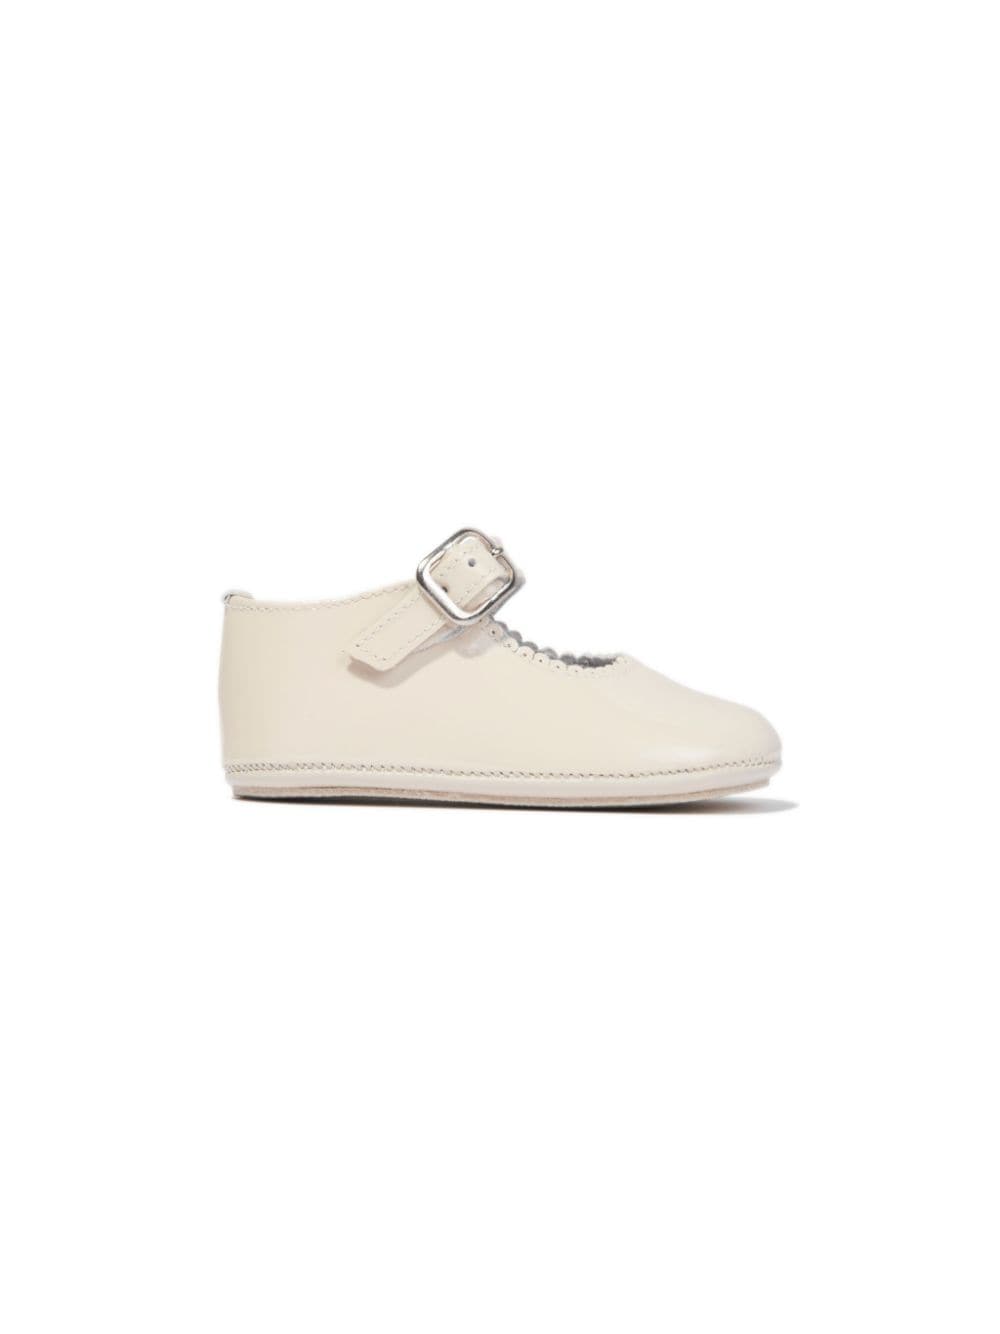 ANDANINES scalloped leather ballerina shoes - White von ANDANINES